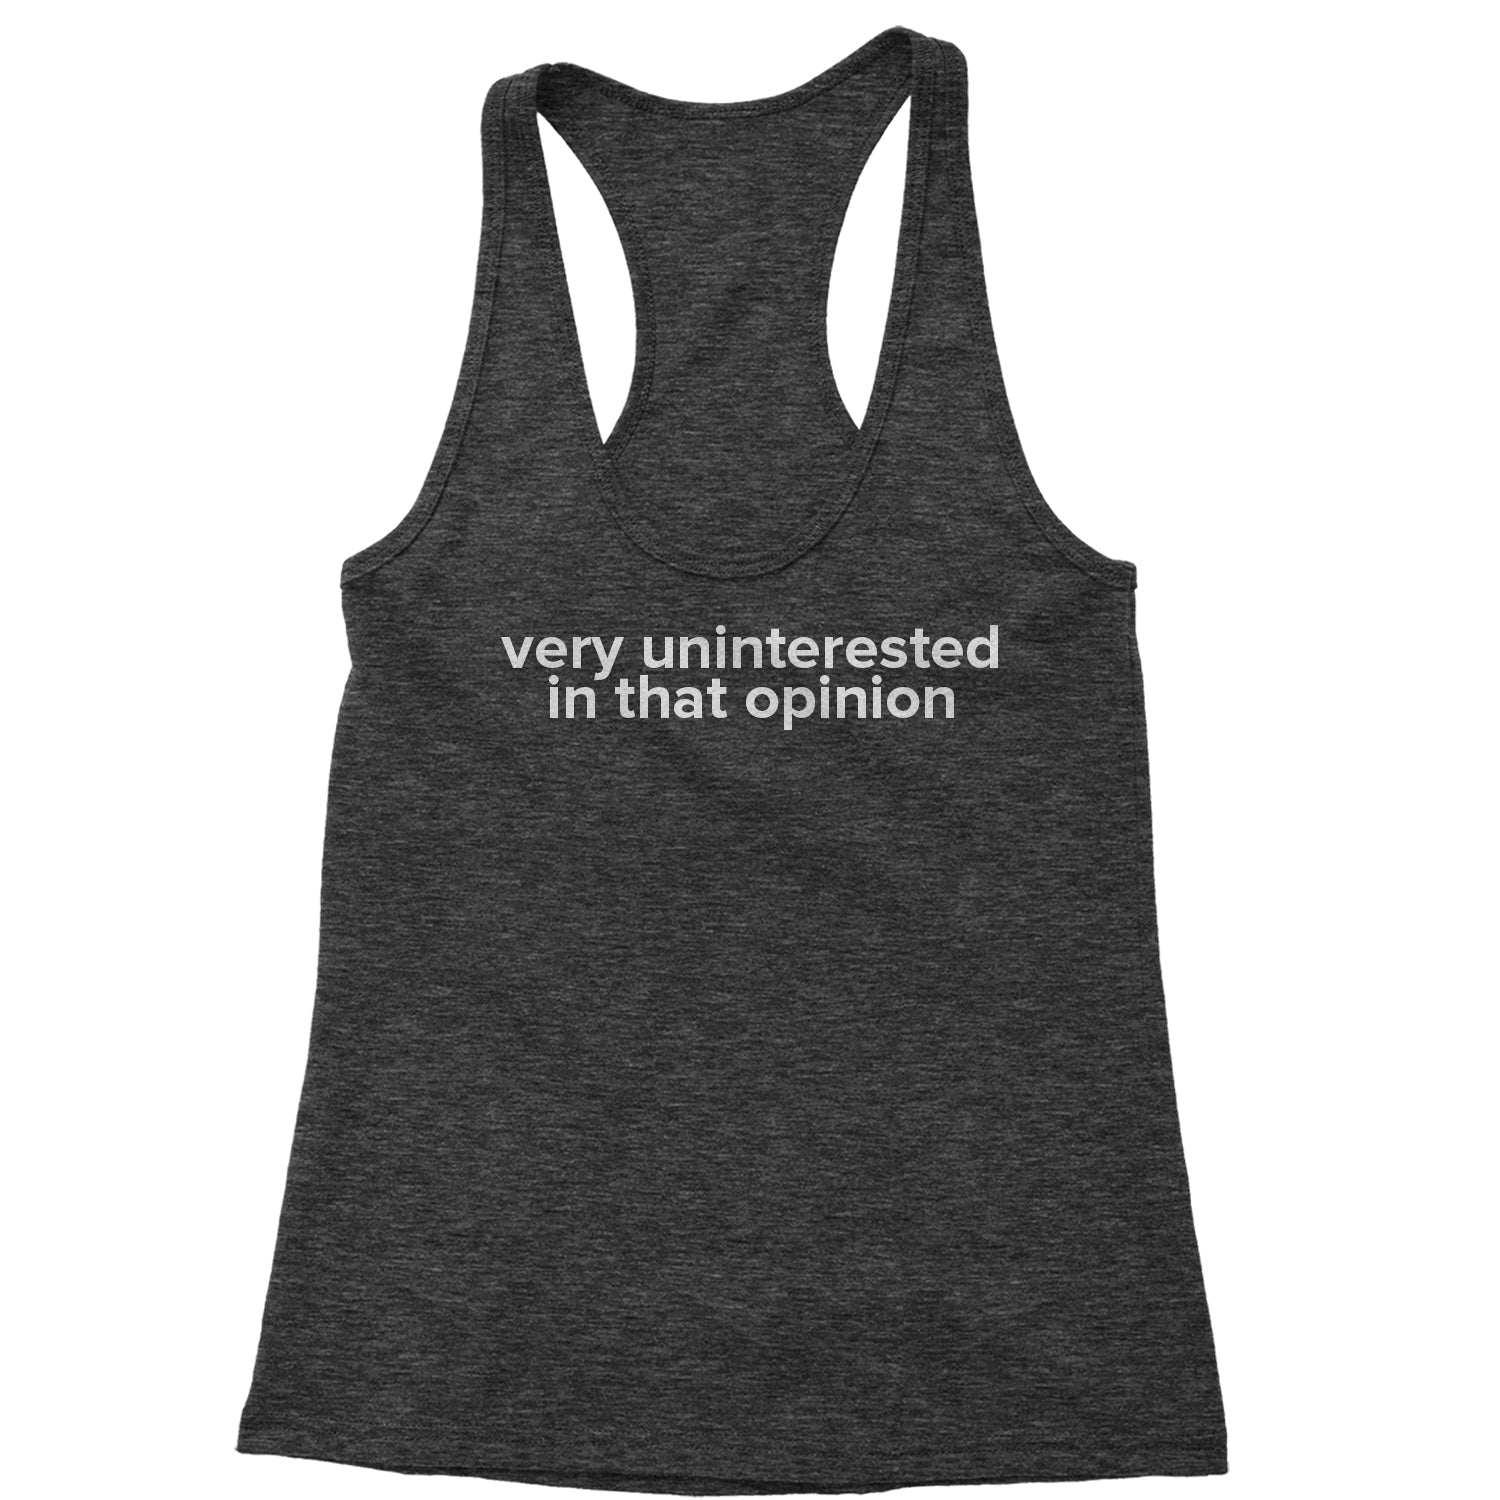 Very Uninterested In That Opinion Racerback Tank Top for Women alexis, creek, d, schitt, schitts by Expression Tees